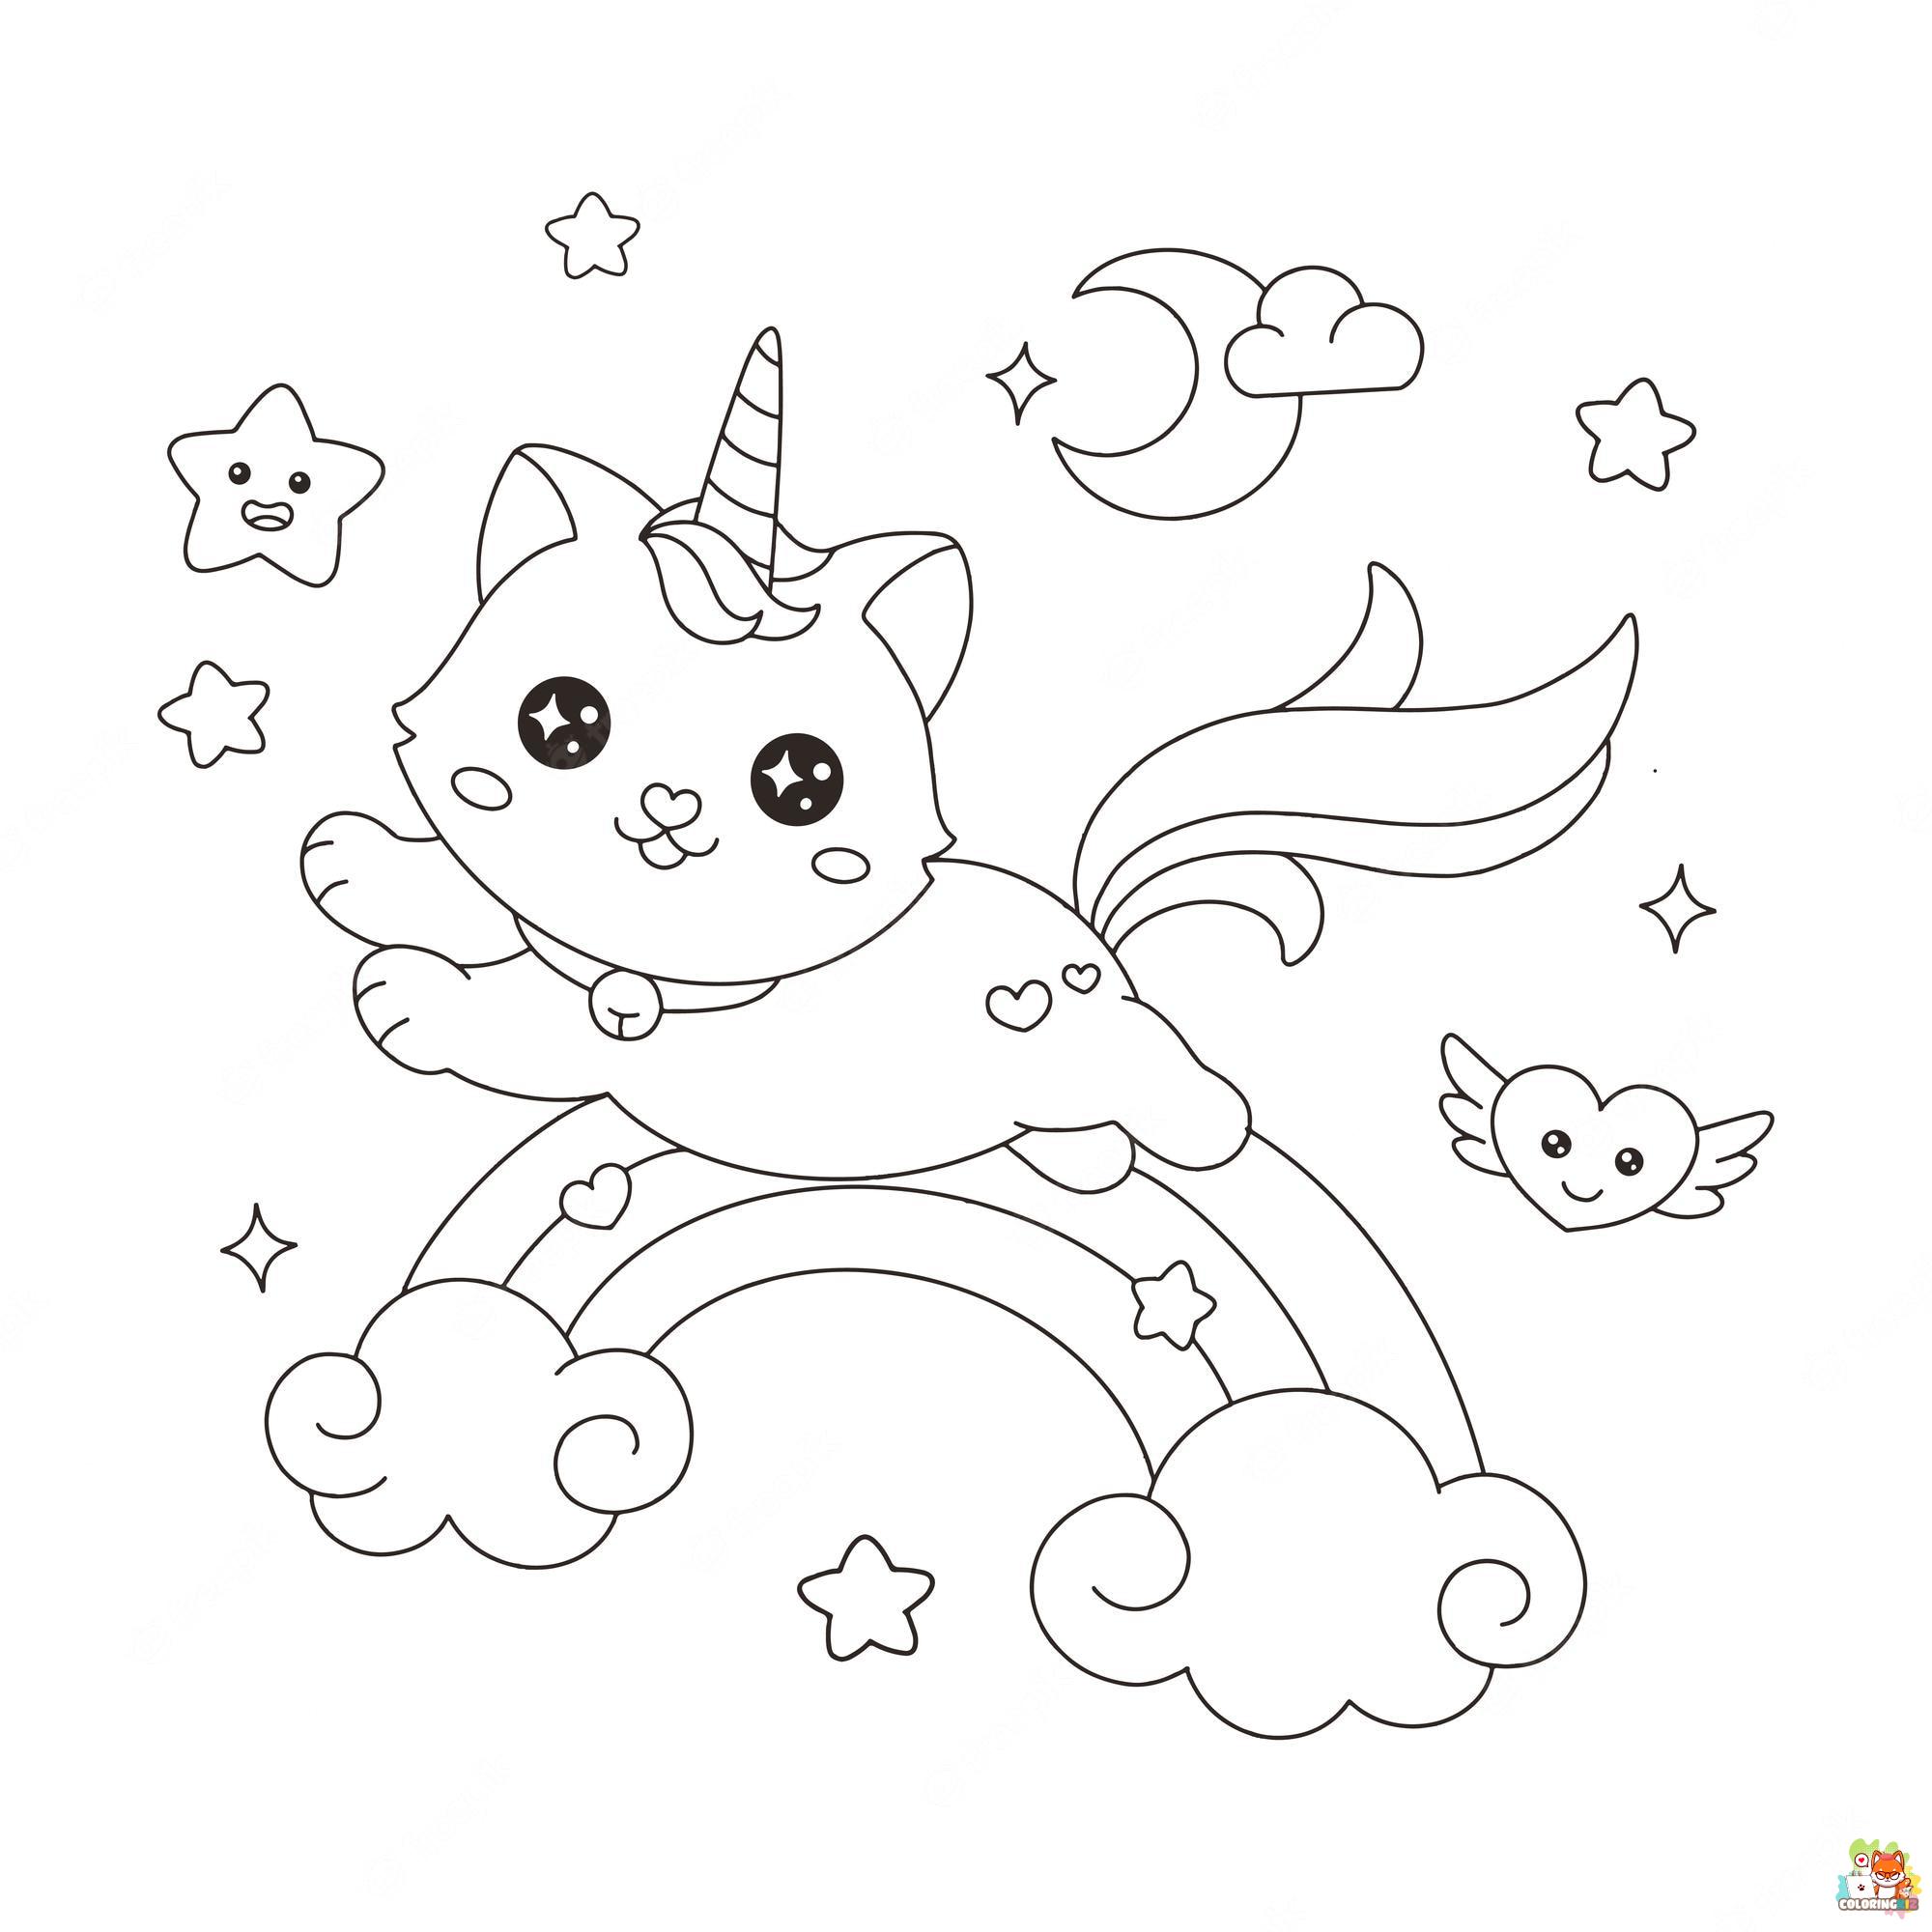 Unicorn Cat on Rainbow Coloring Pages 5